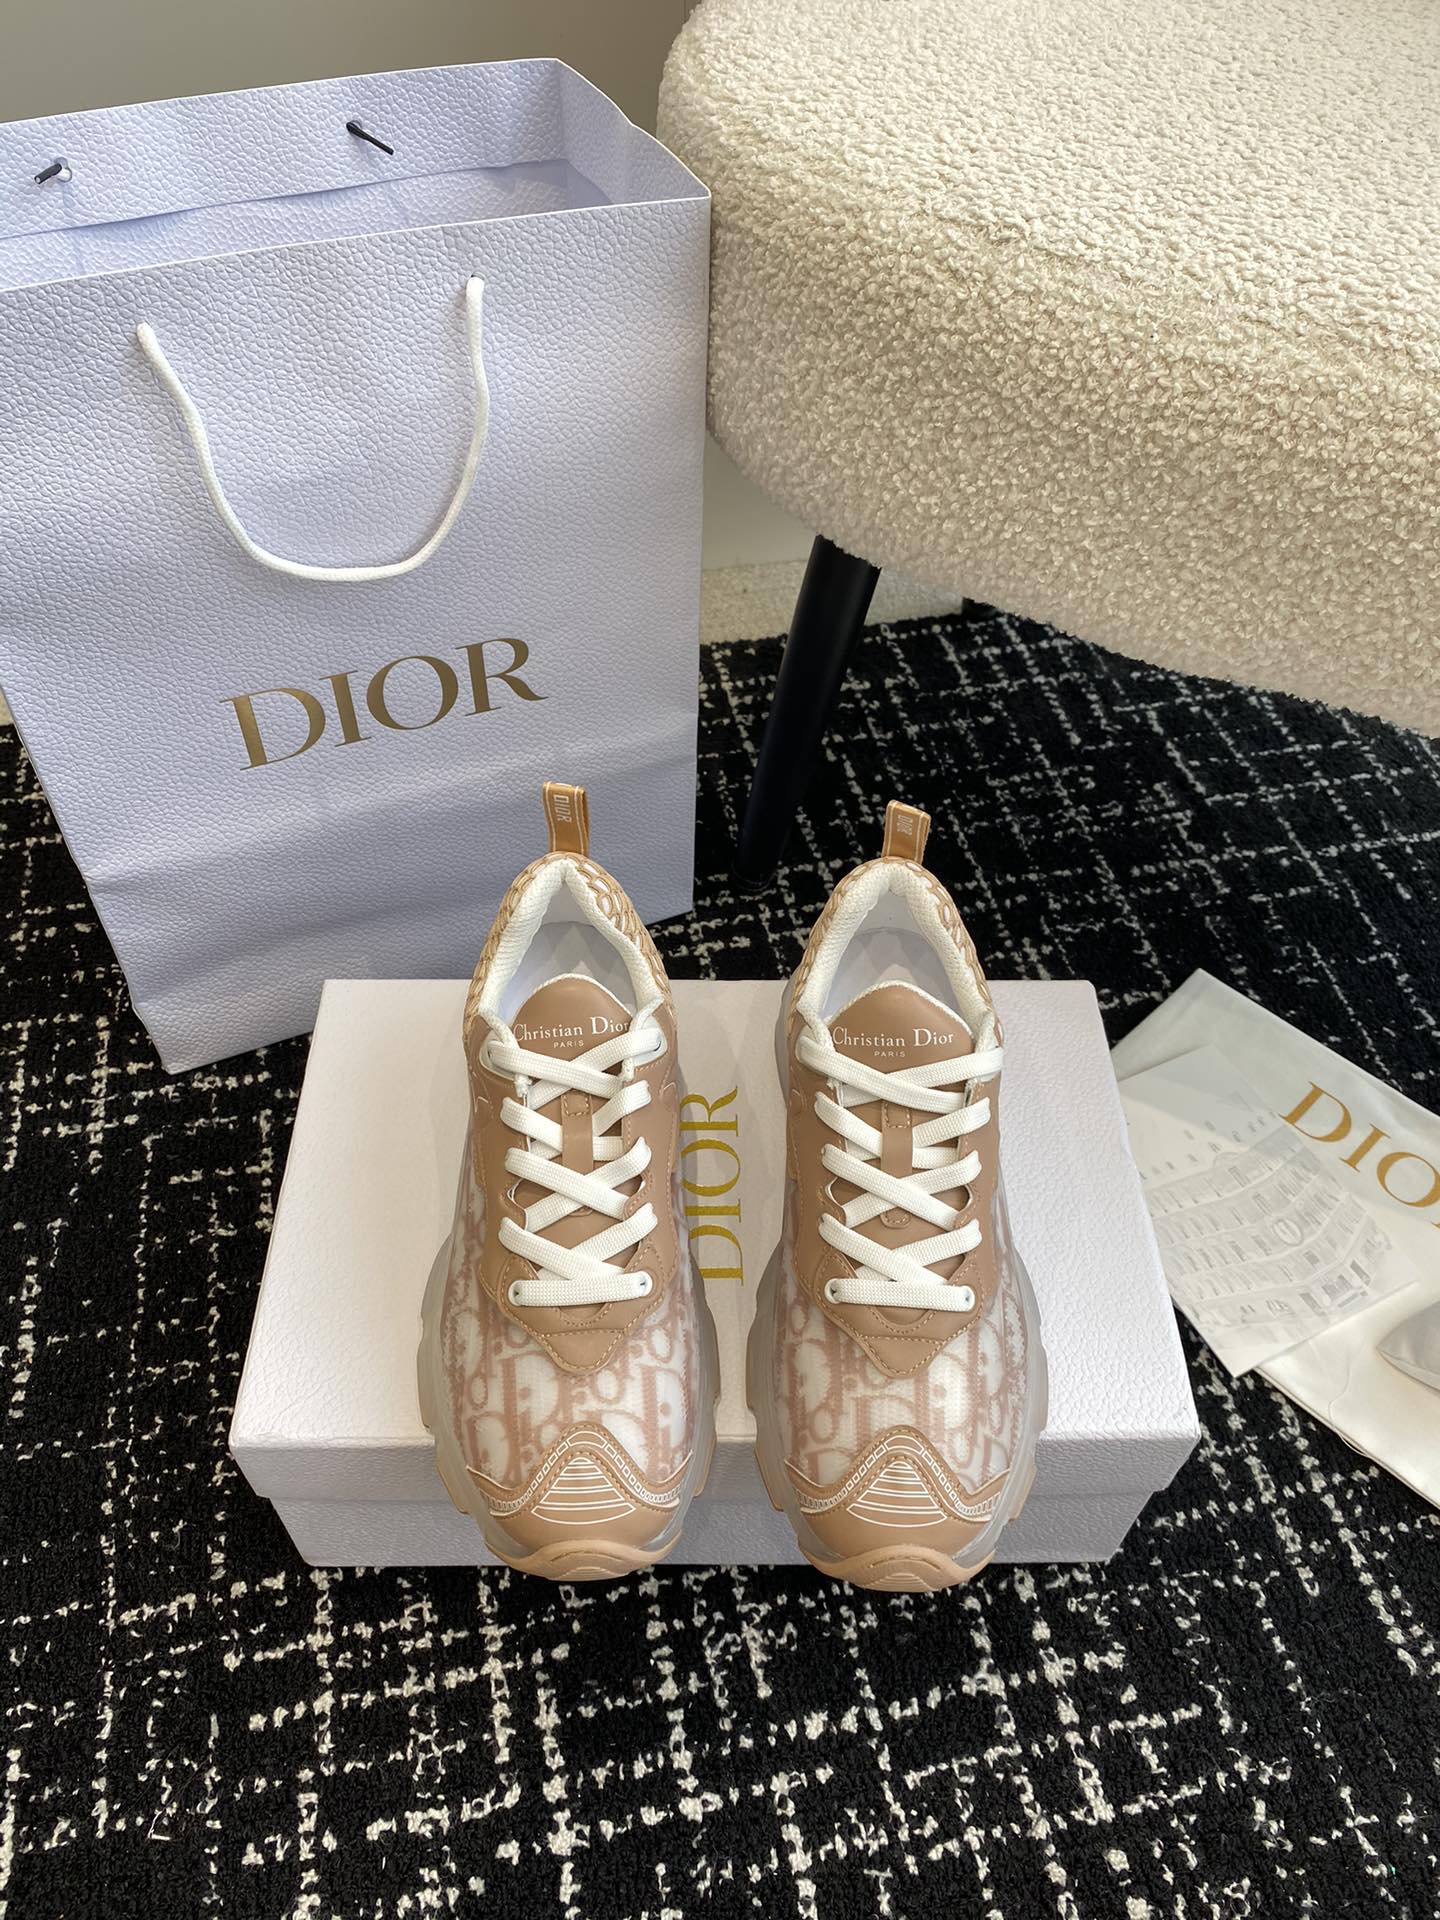 Dior Sneakers Casual Shoes White Fabric Rubber Spring/Summer Collection Fashion Casual